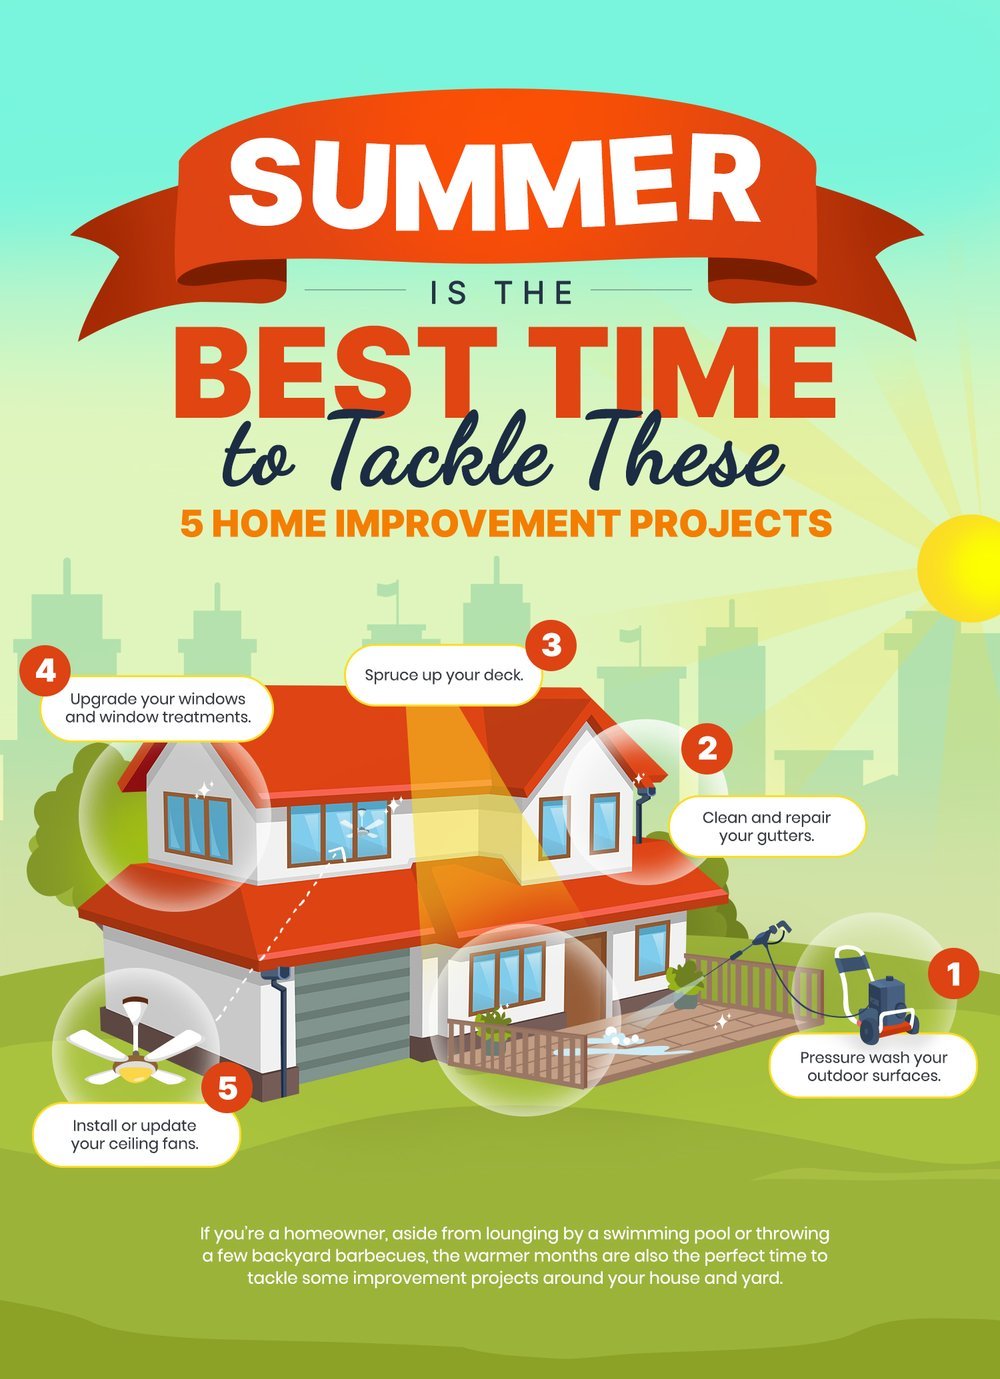 Summer Is The Best Time to Tackle These 5 Home Improvement Projects